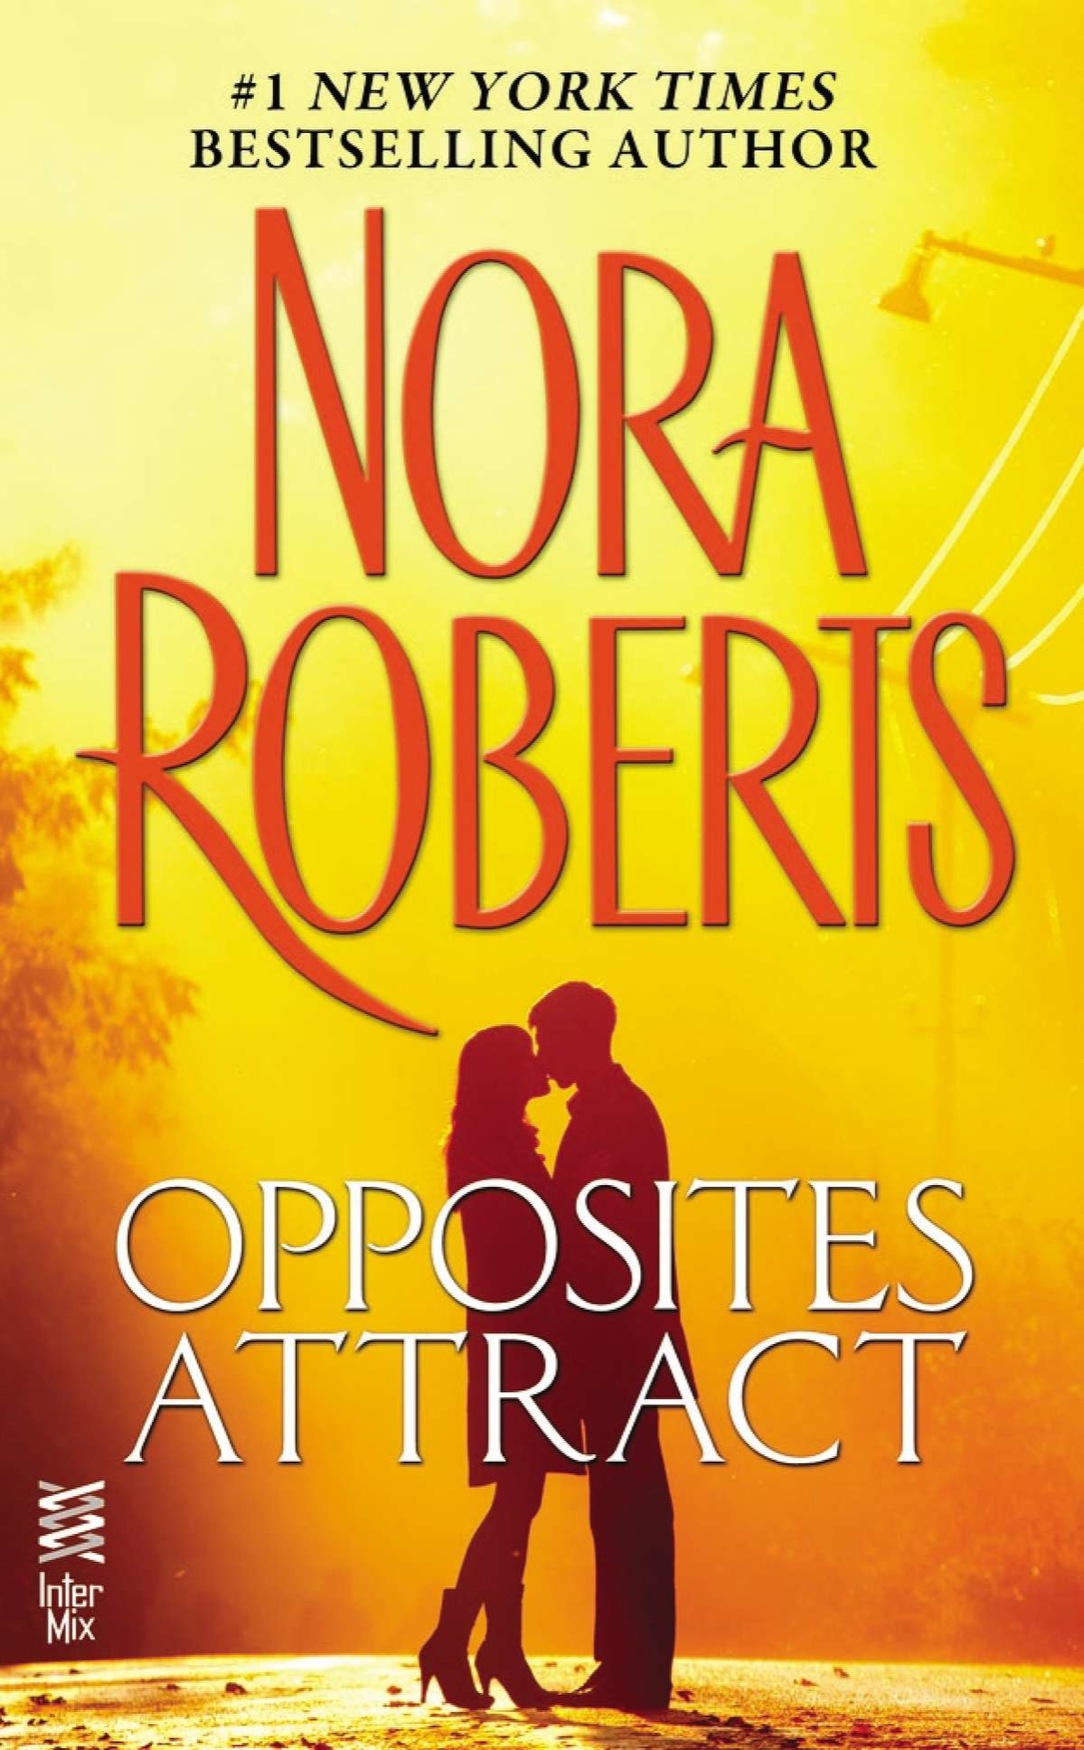 Opposites Attract (2012) by Nora Roberts